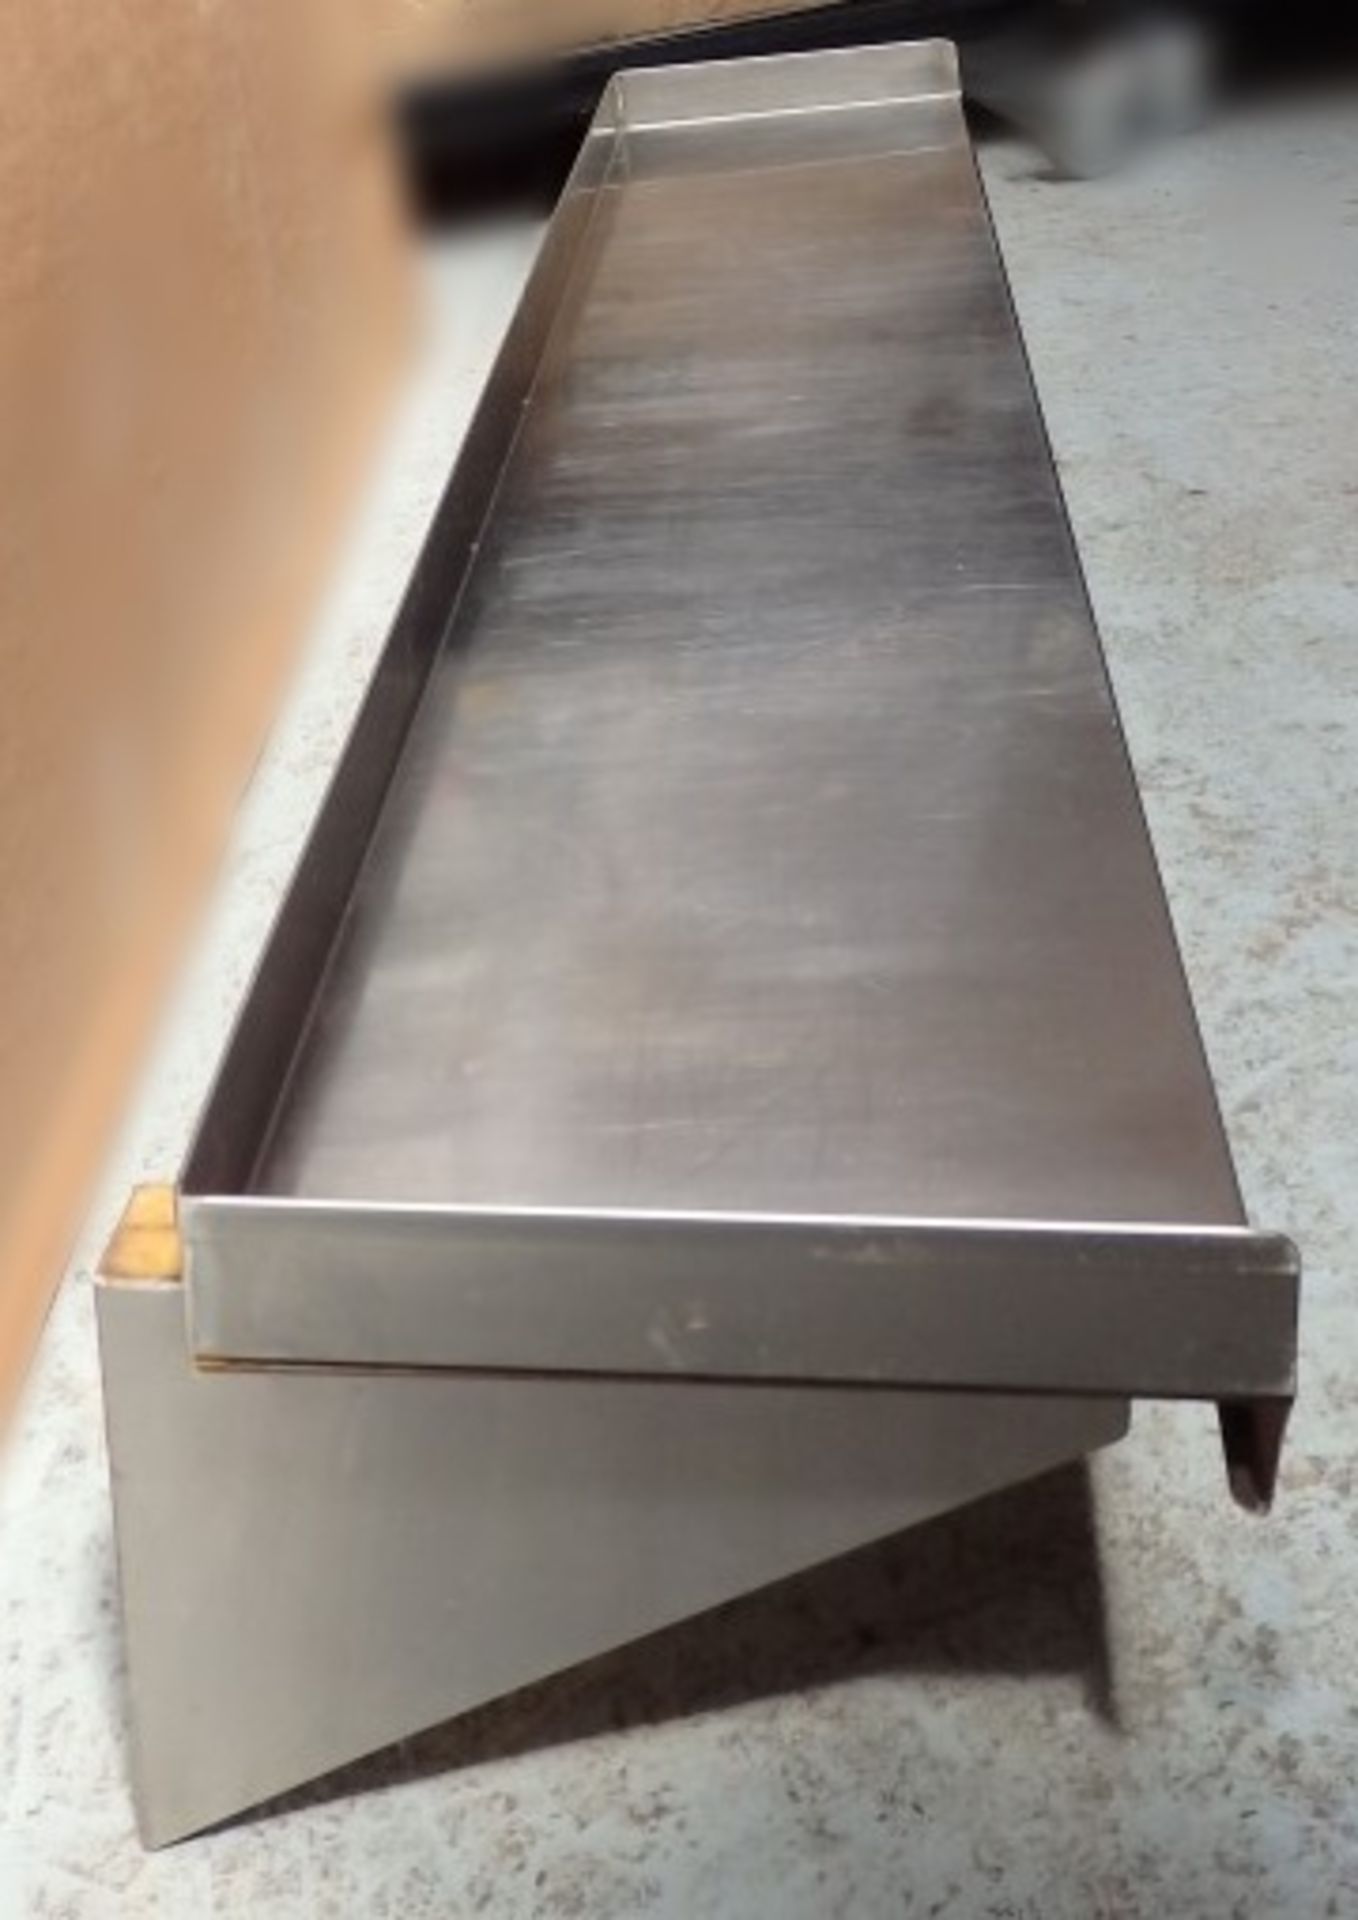 1 x Commercial "Simply Stainless" Wall Shelf - Dimensions: 30 x 80cm - Ref: MUS008 - CL007 - - Image 2 of 2